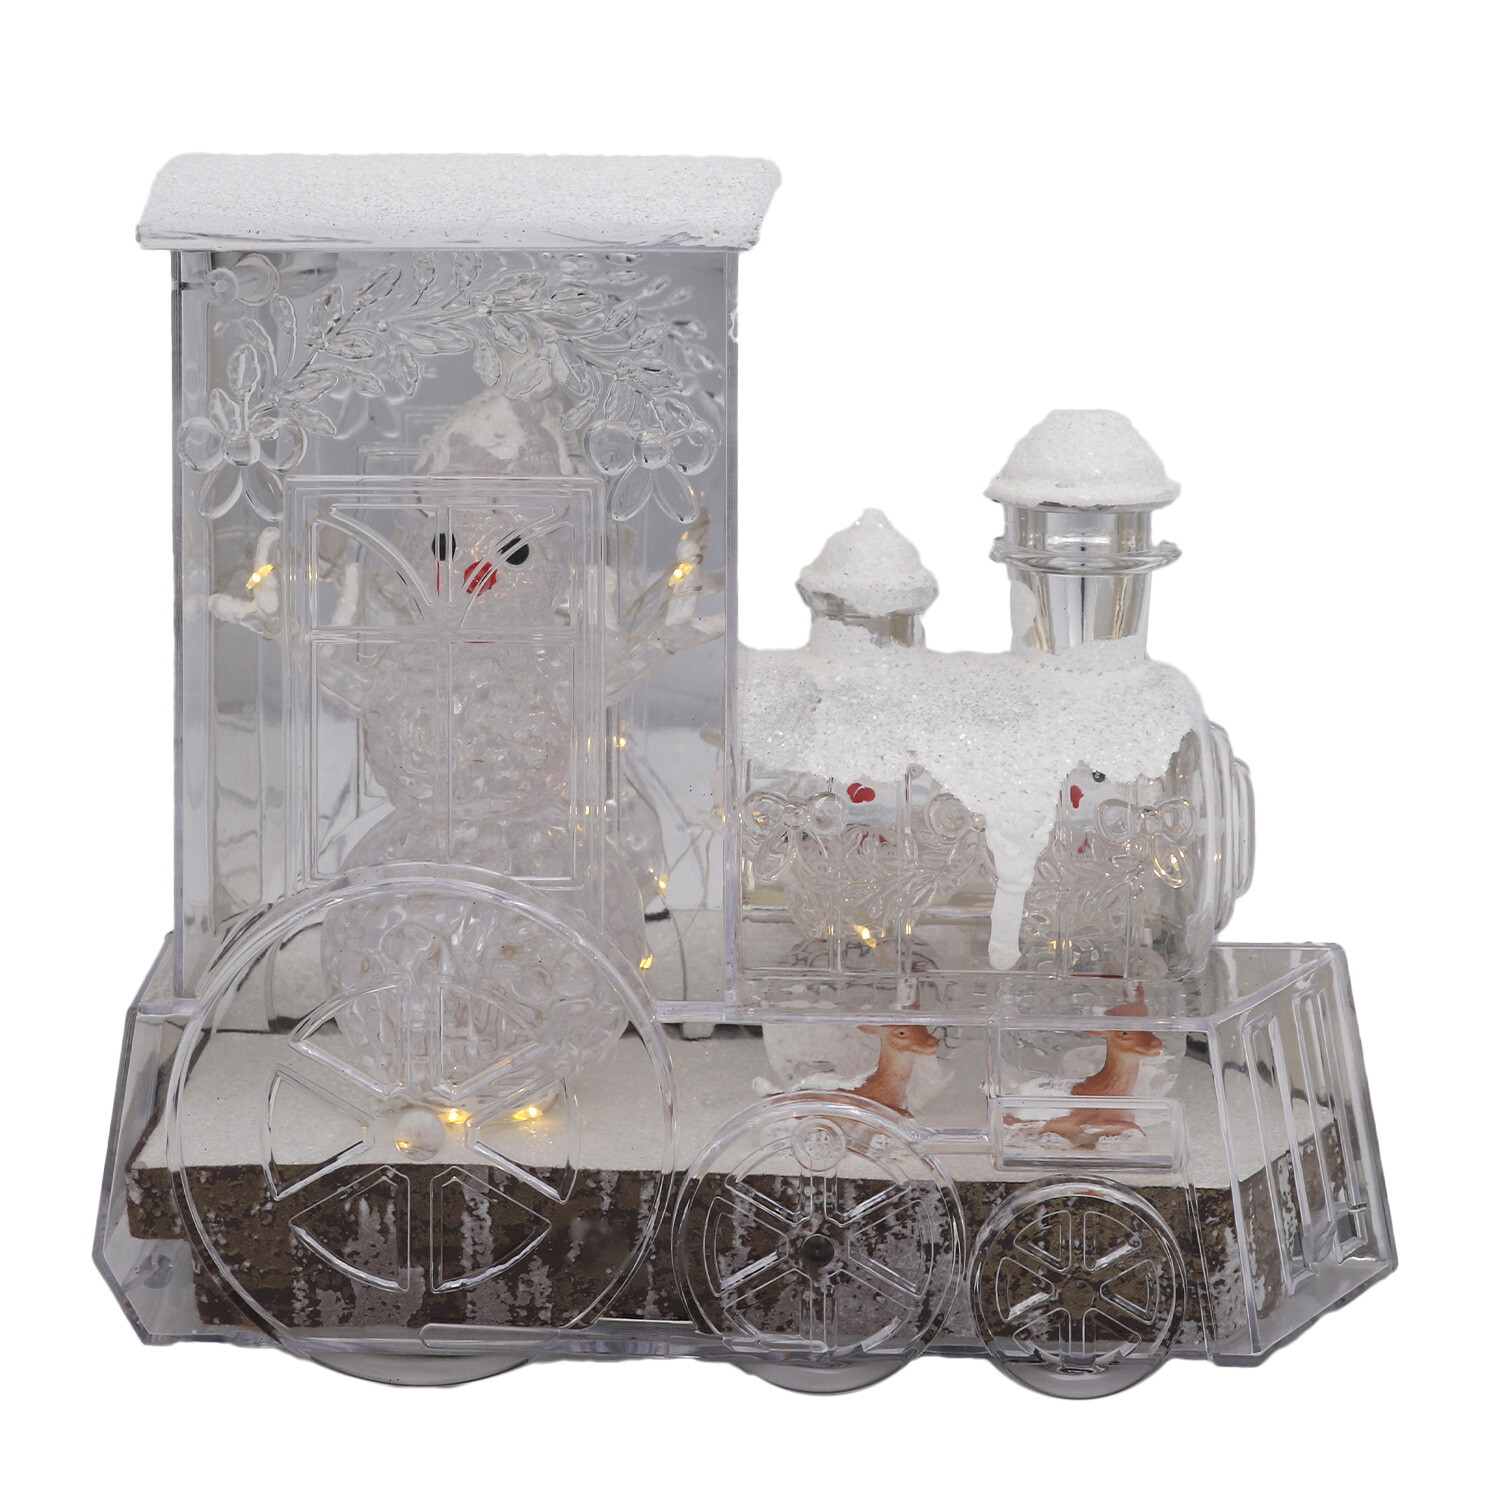 LED Train with Snowman Scene - Silver Image 1